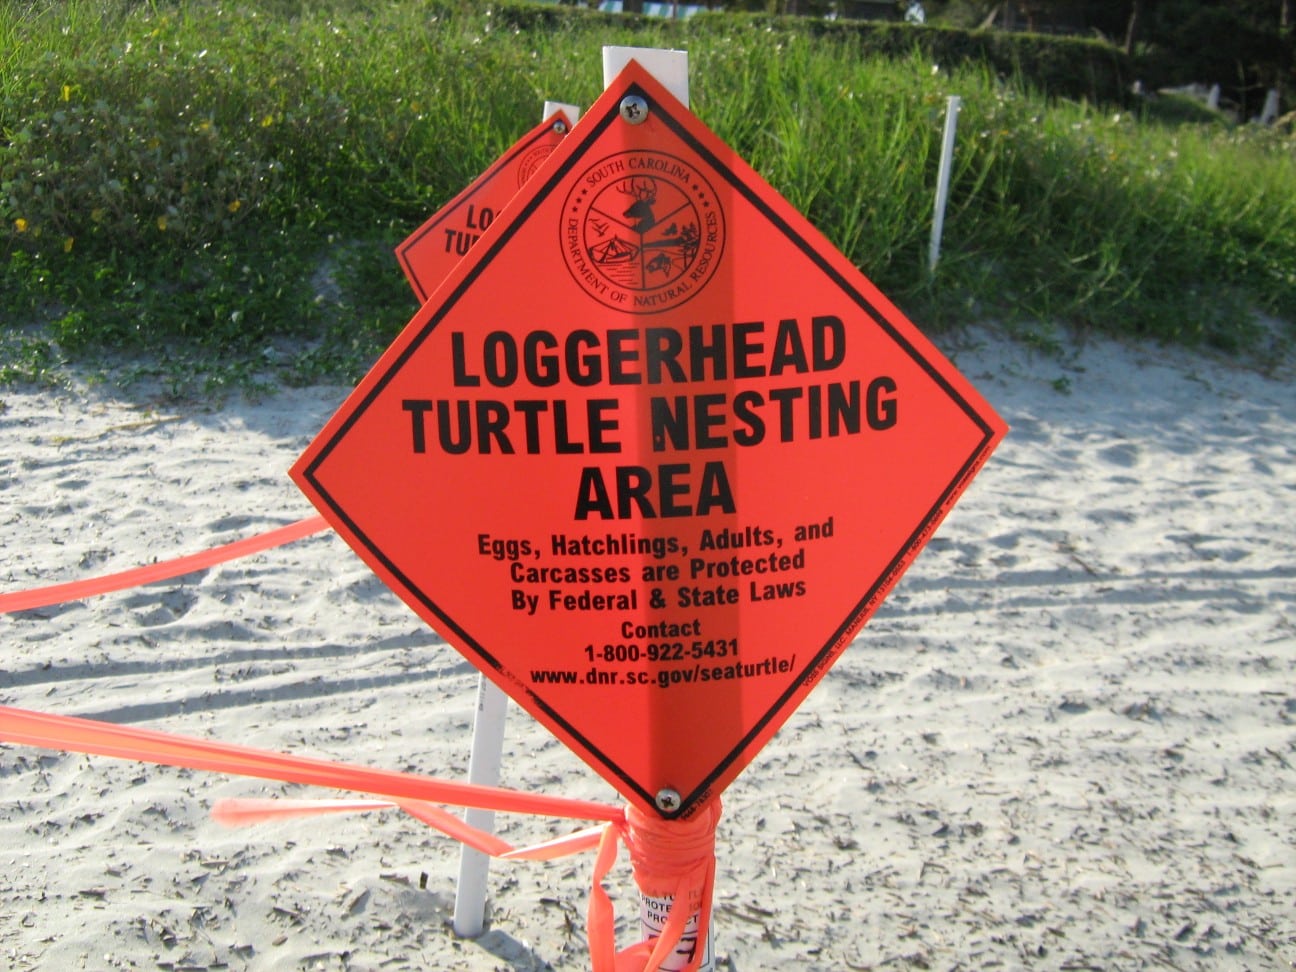 Woman Arrested In Florida For Harassing Sea Turtle Nest